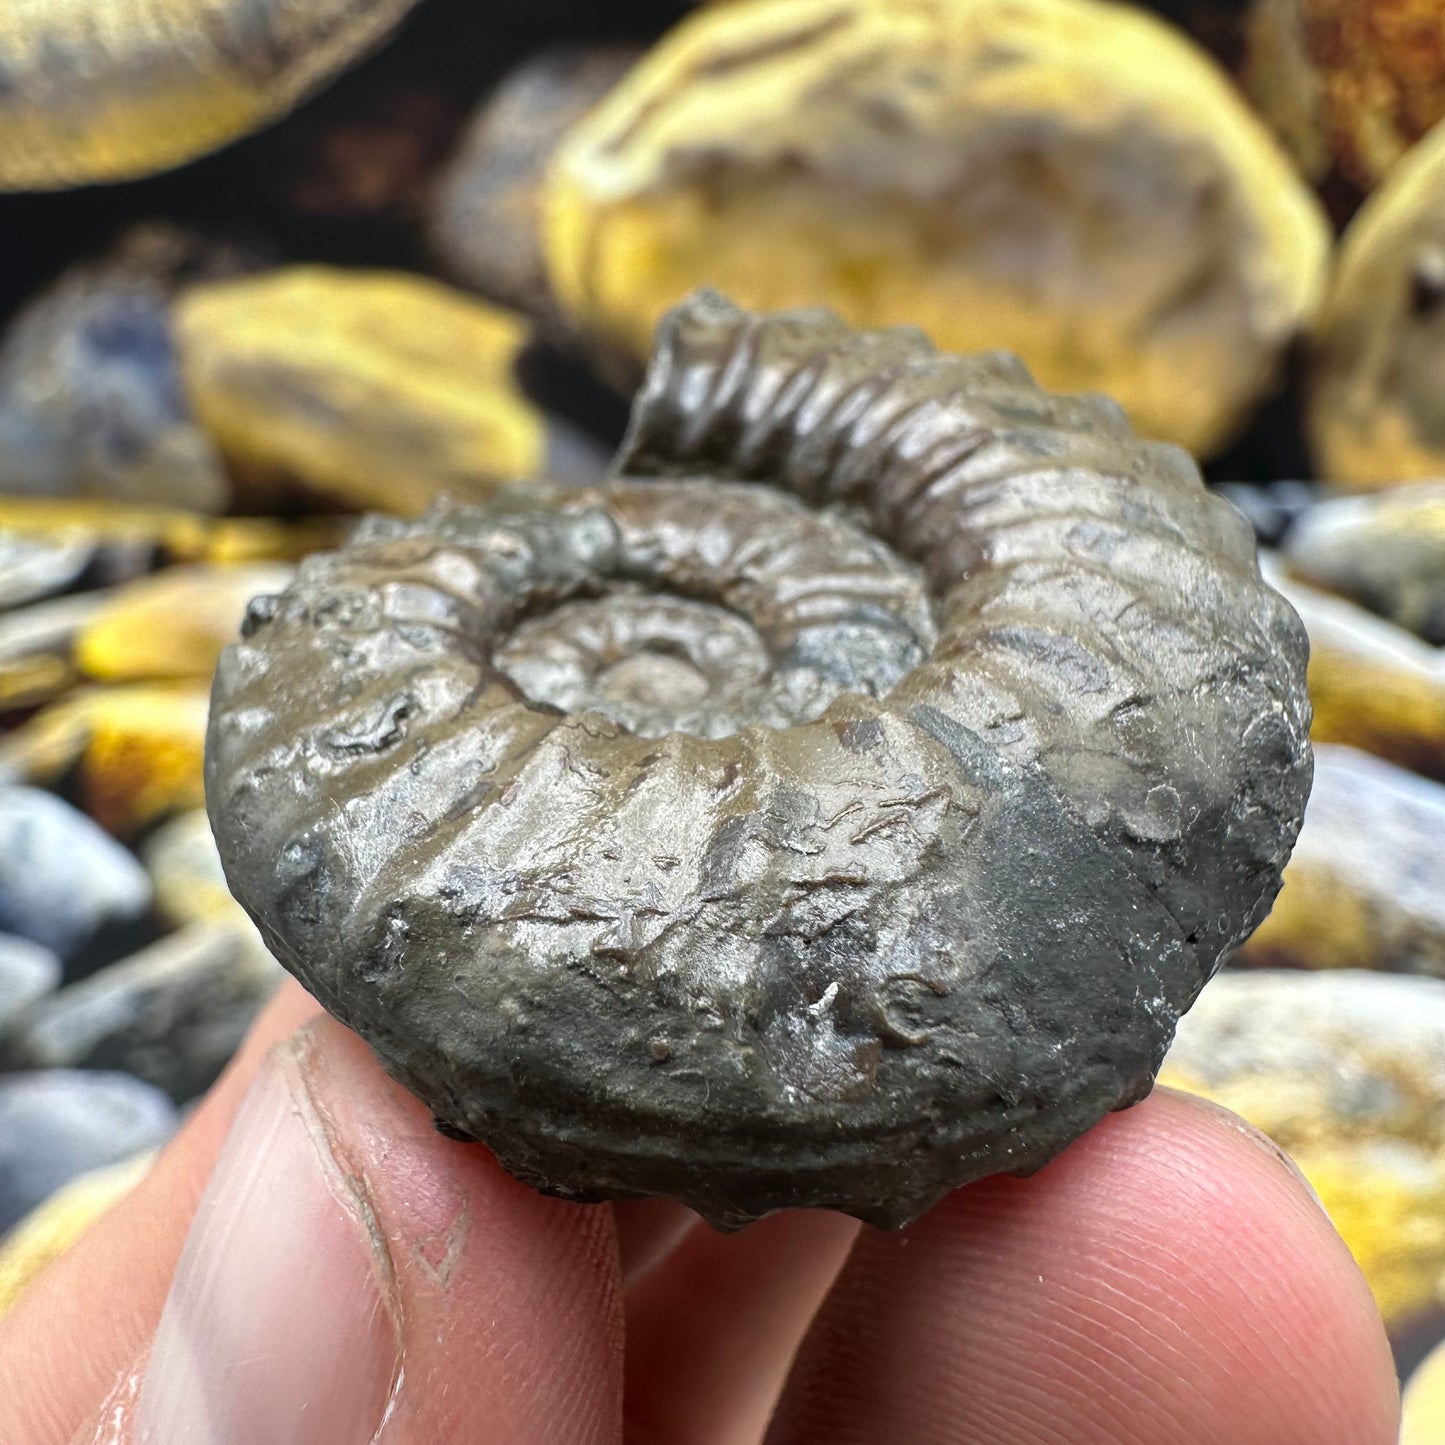 Agassiceras sp. ammonite fossil - Whitby, North Yorkshire